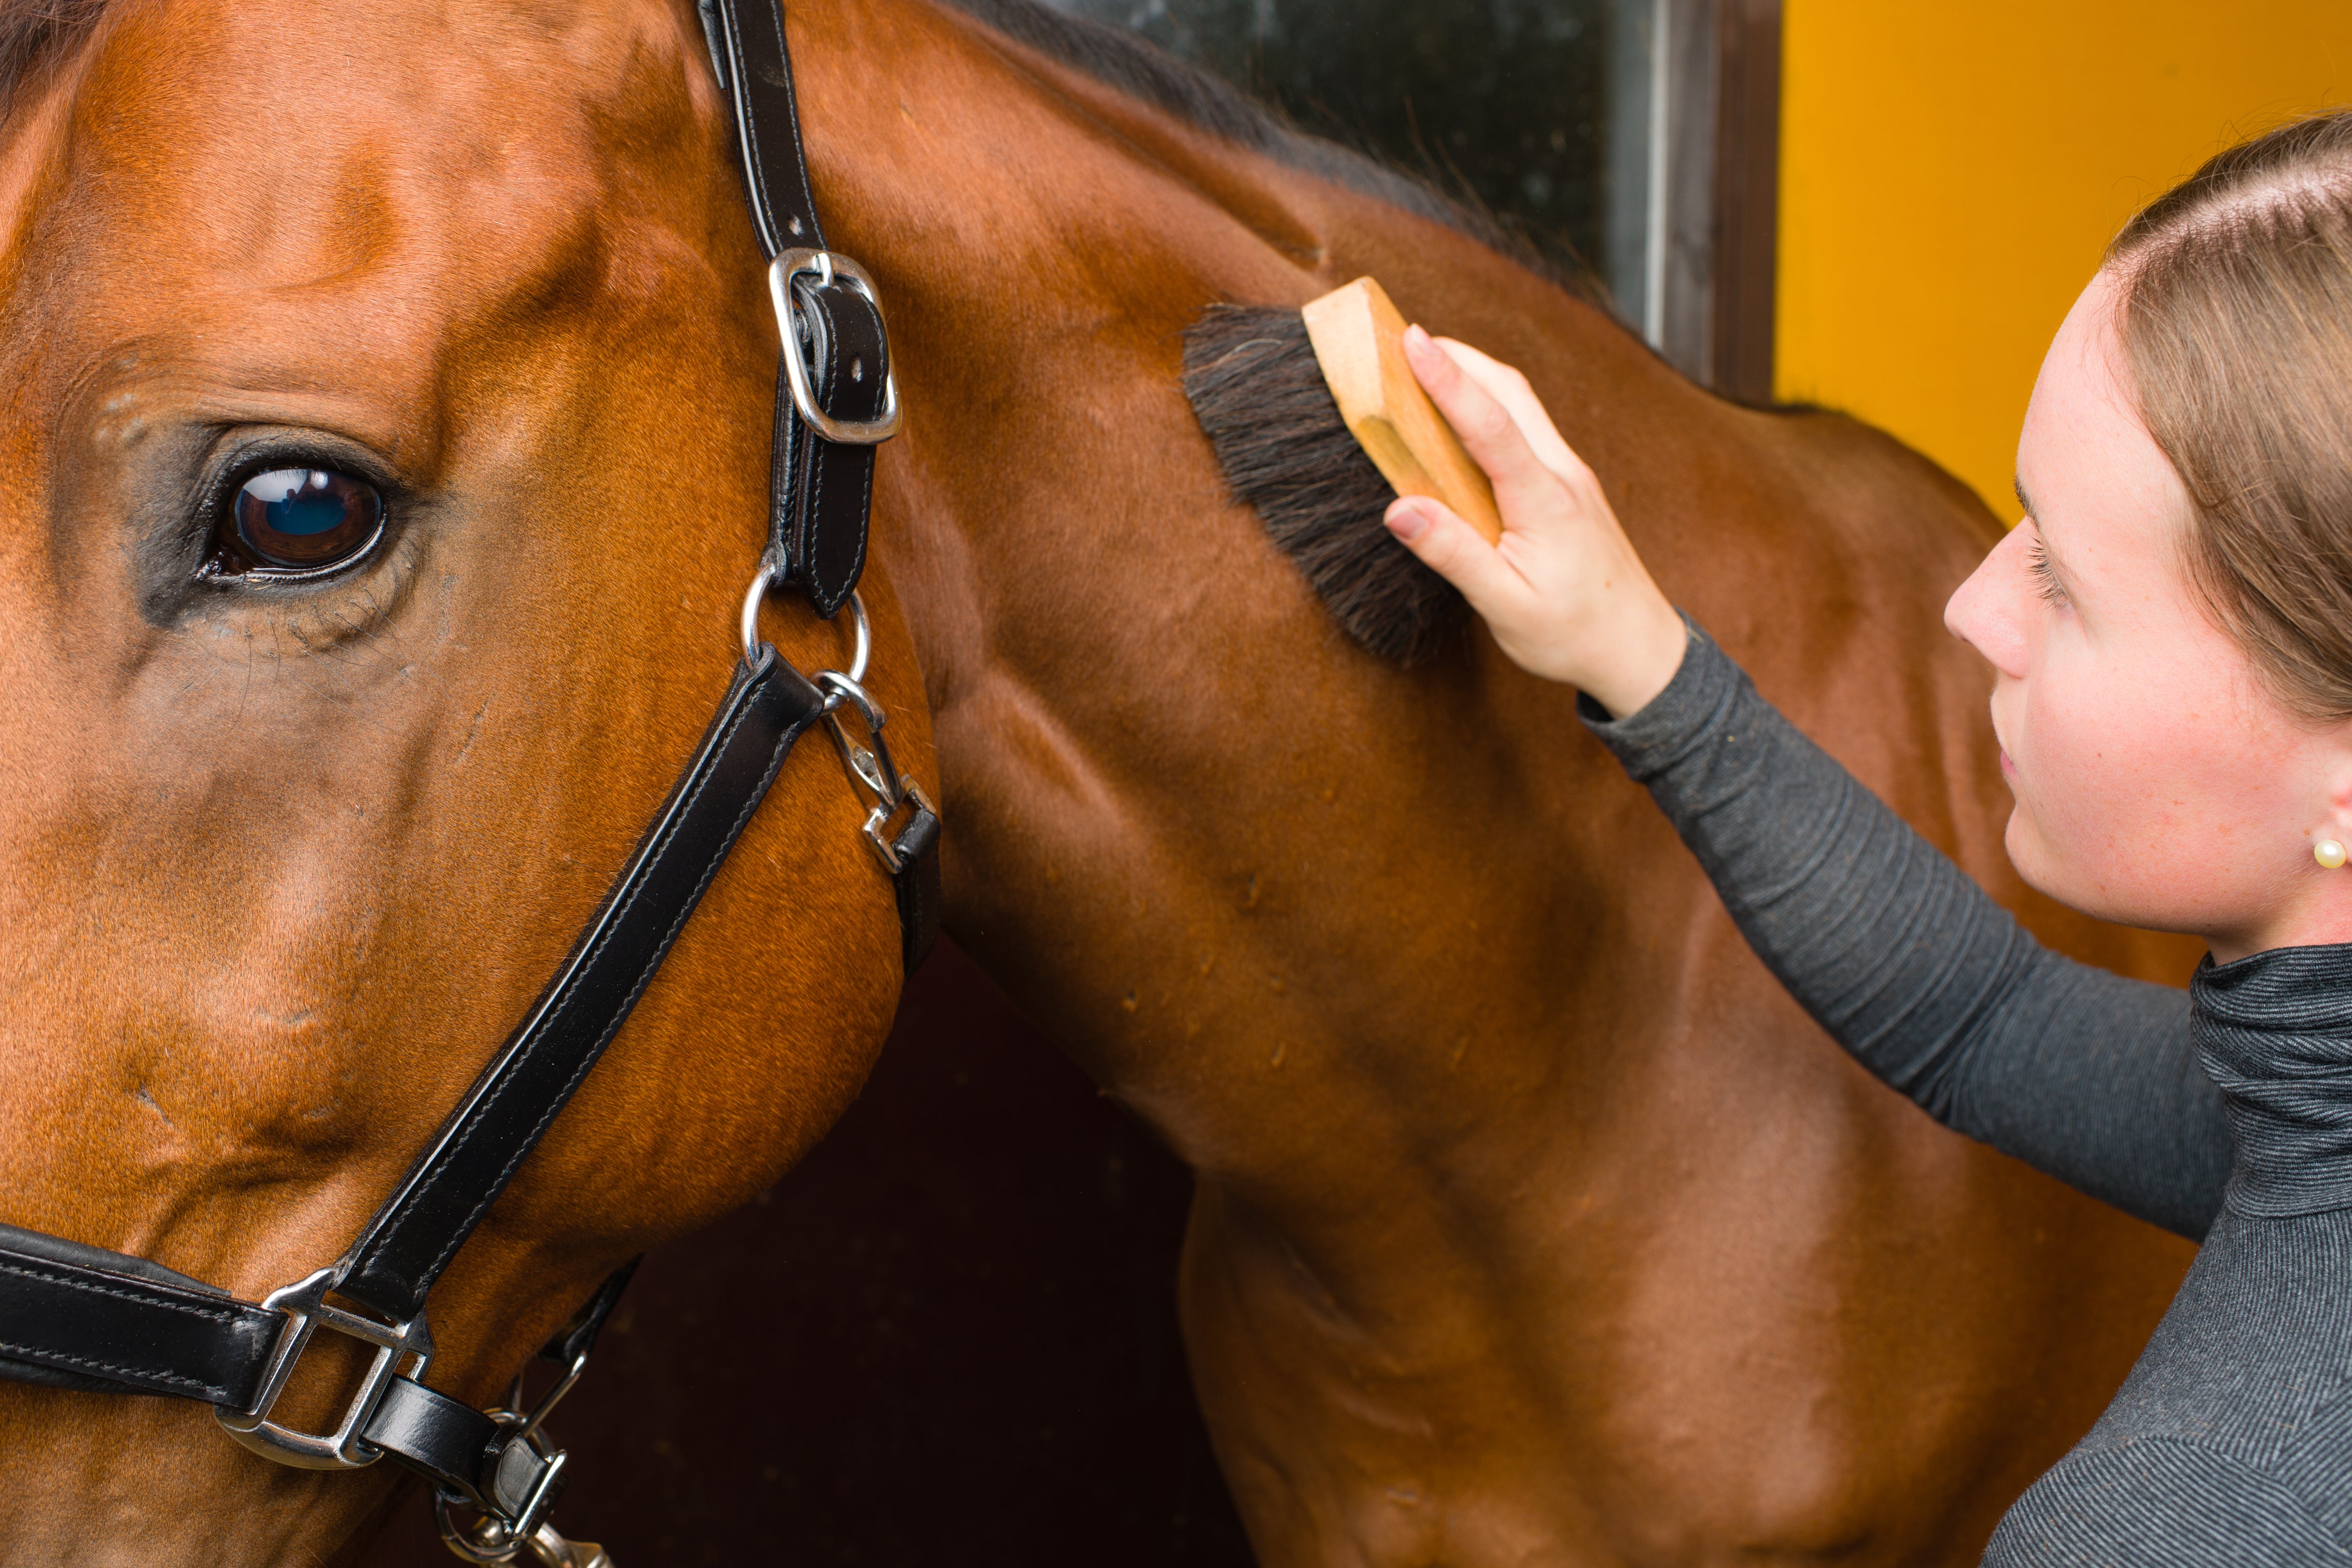 A beginner’s guide to horse grooming